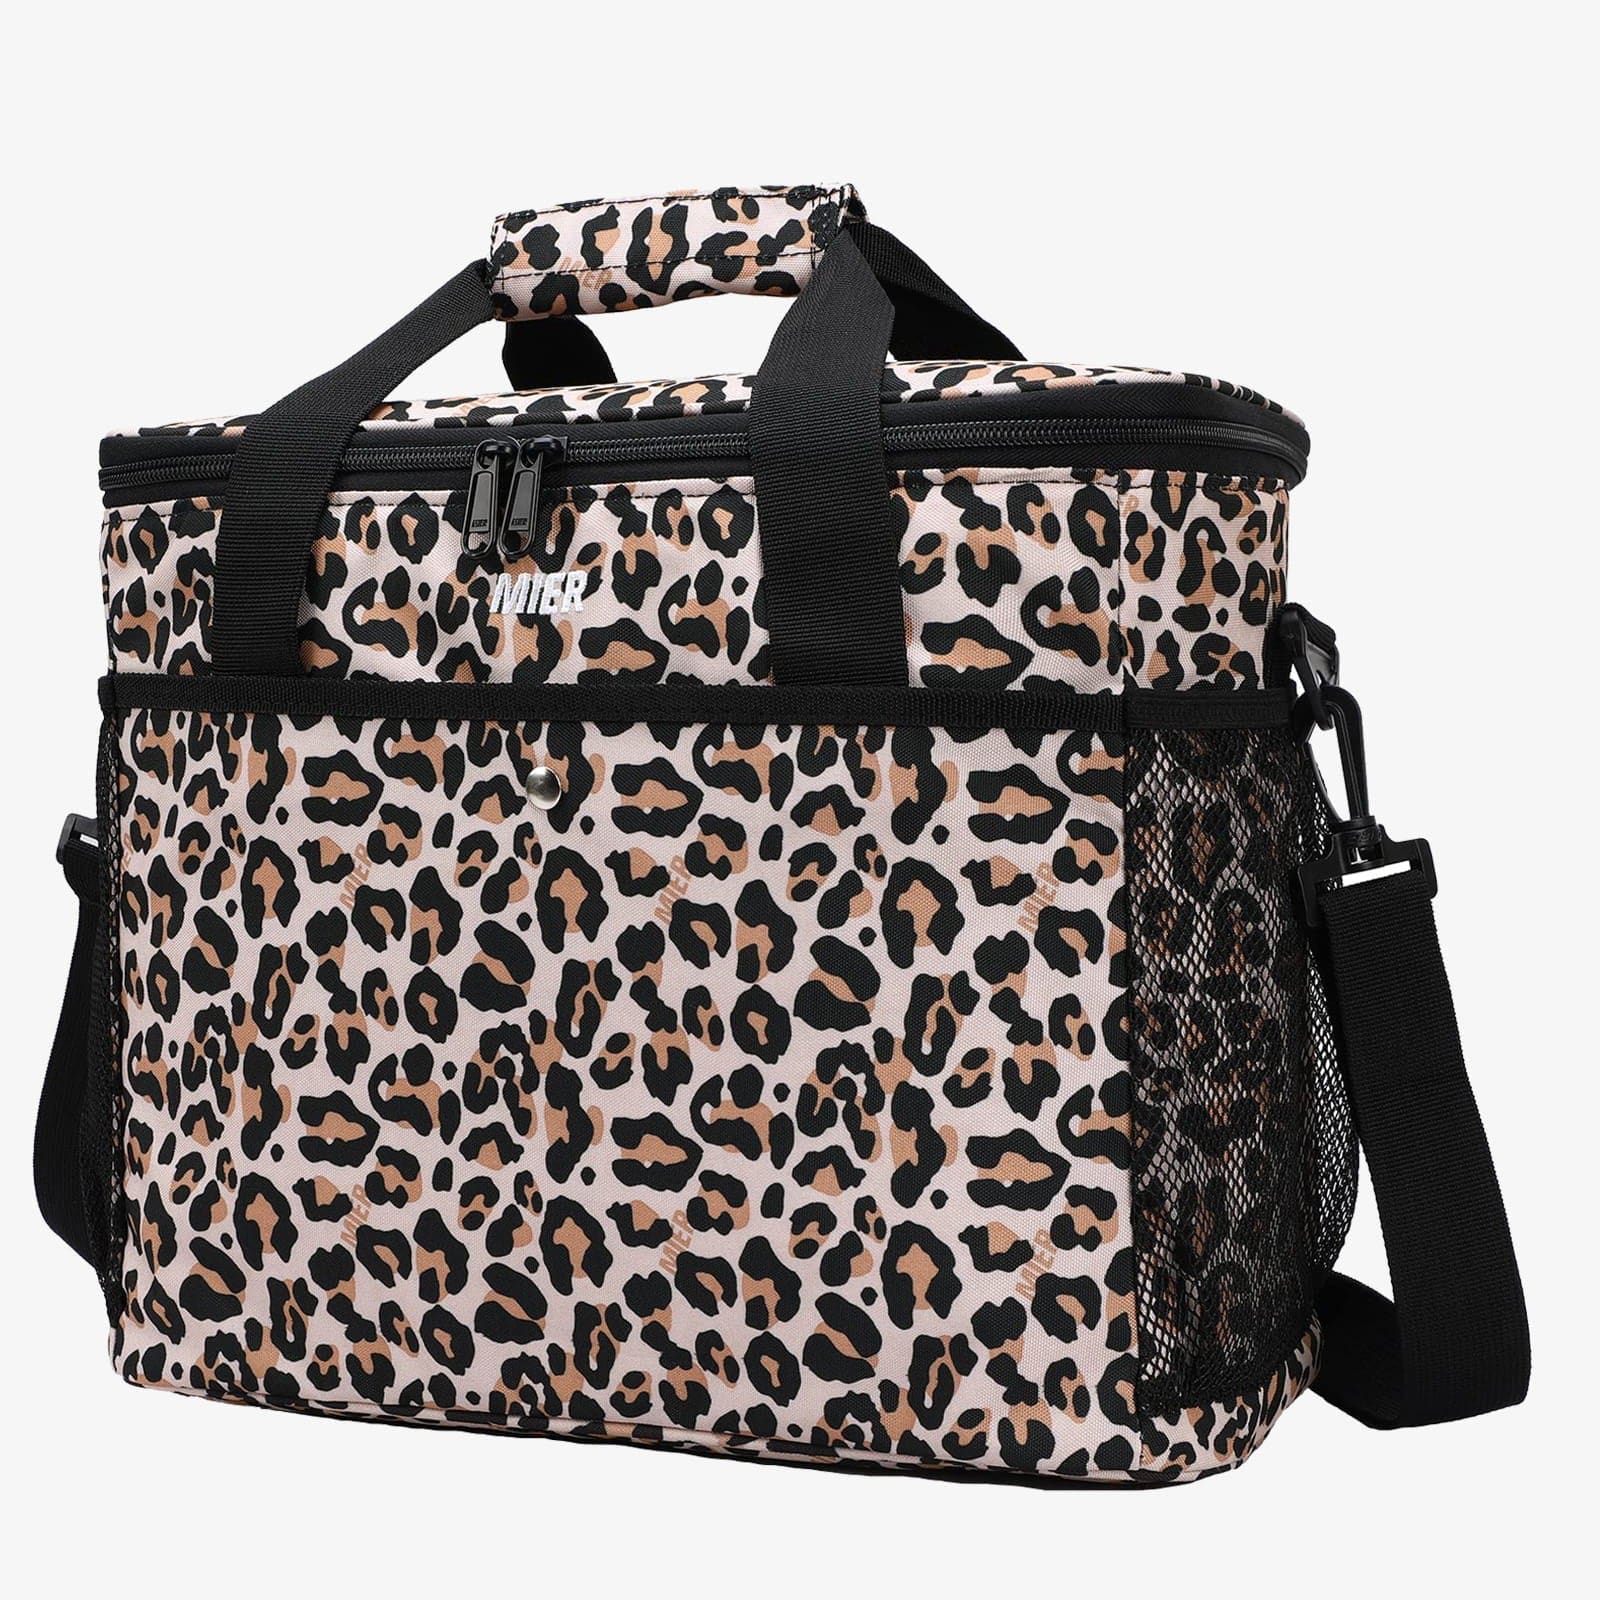 Large Soft Cooler Insulated Lunch Bag Tote for Men Women Adult Lunch Bag Leopard MIER